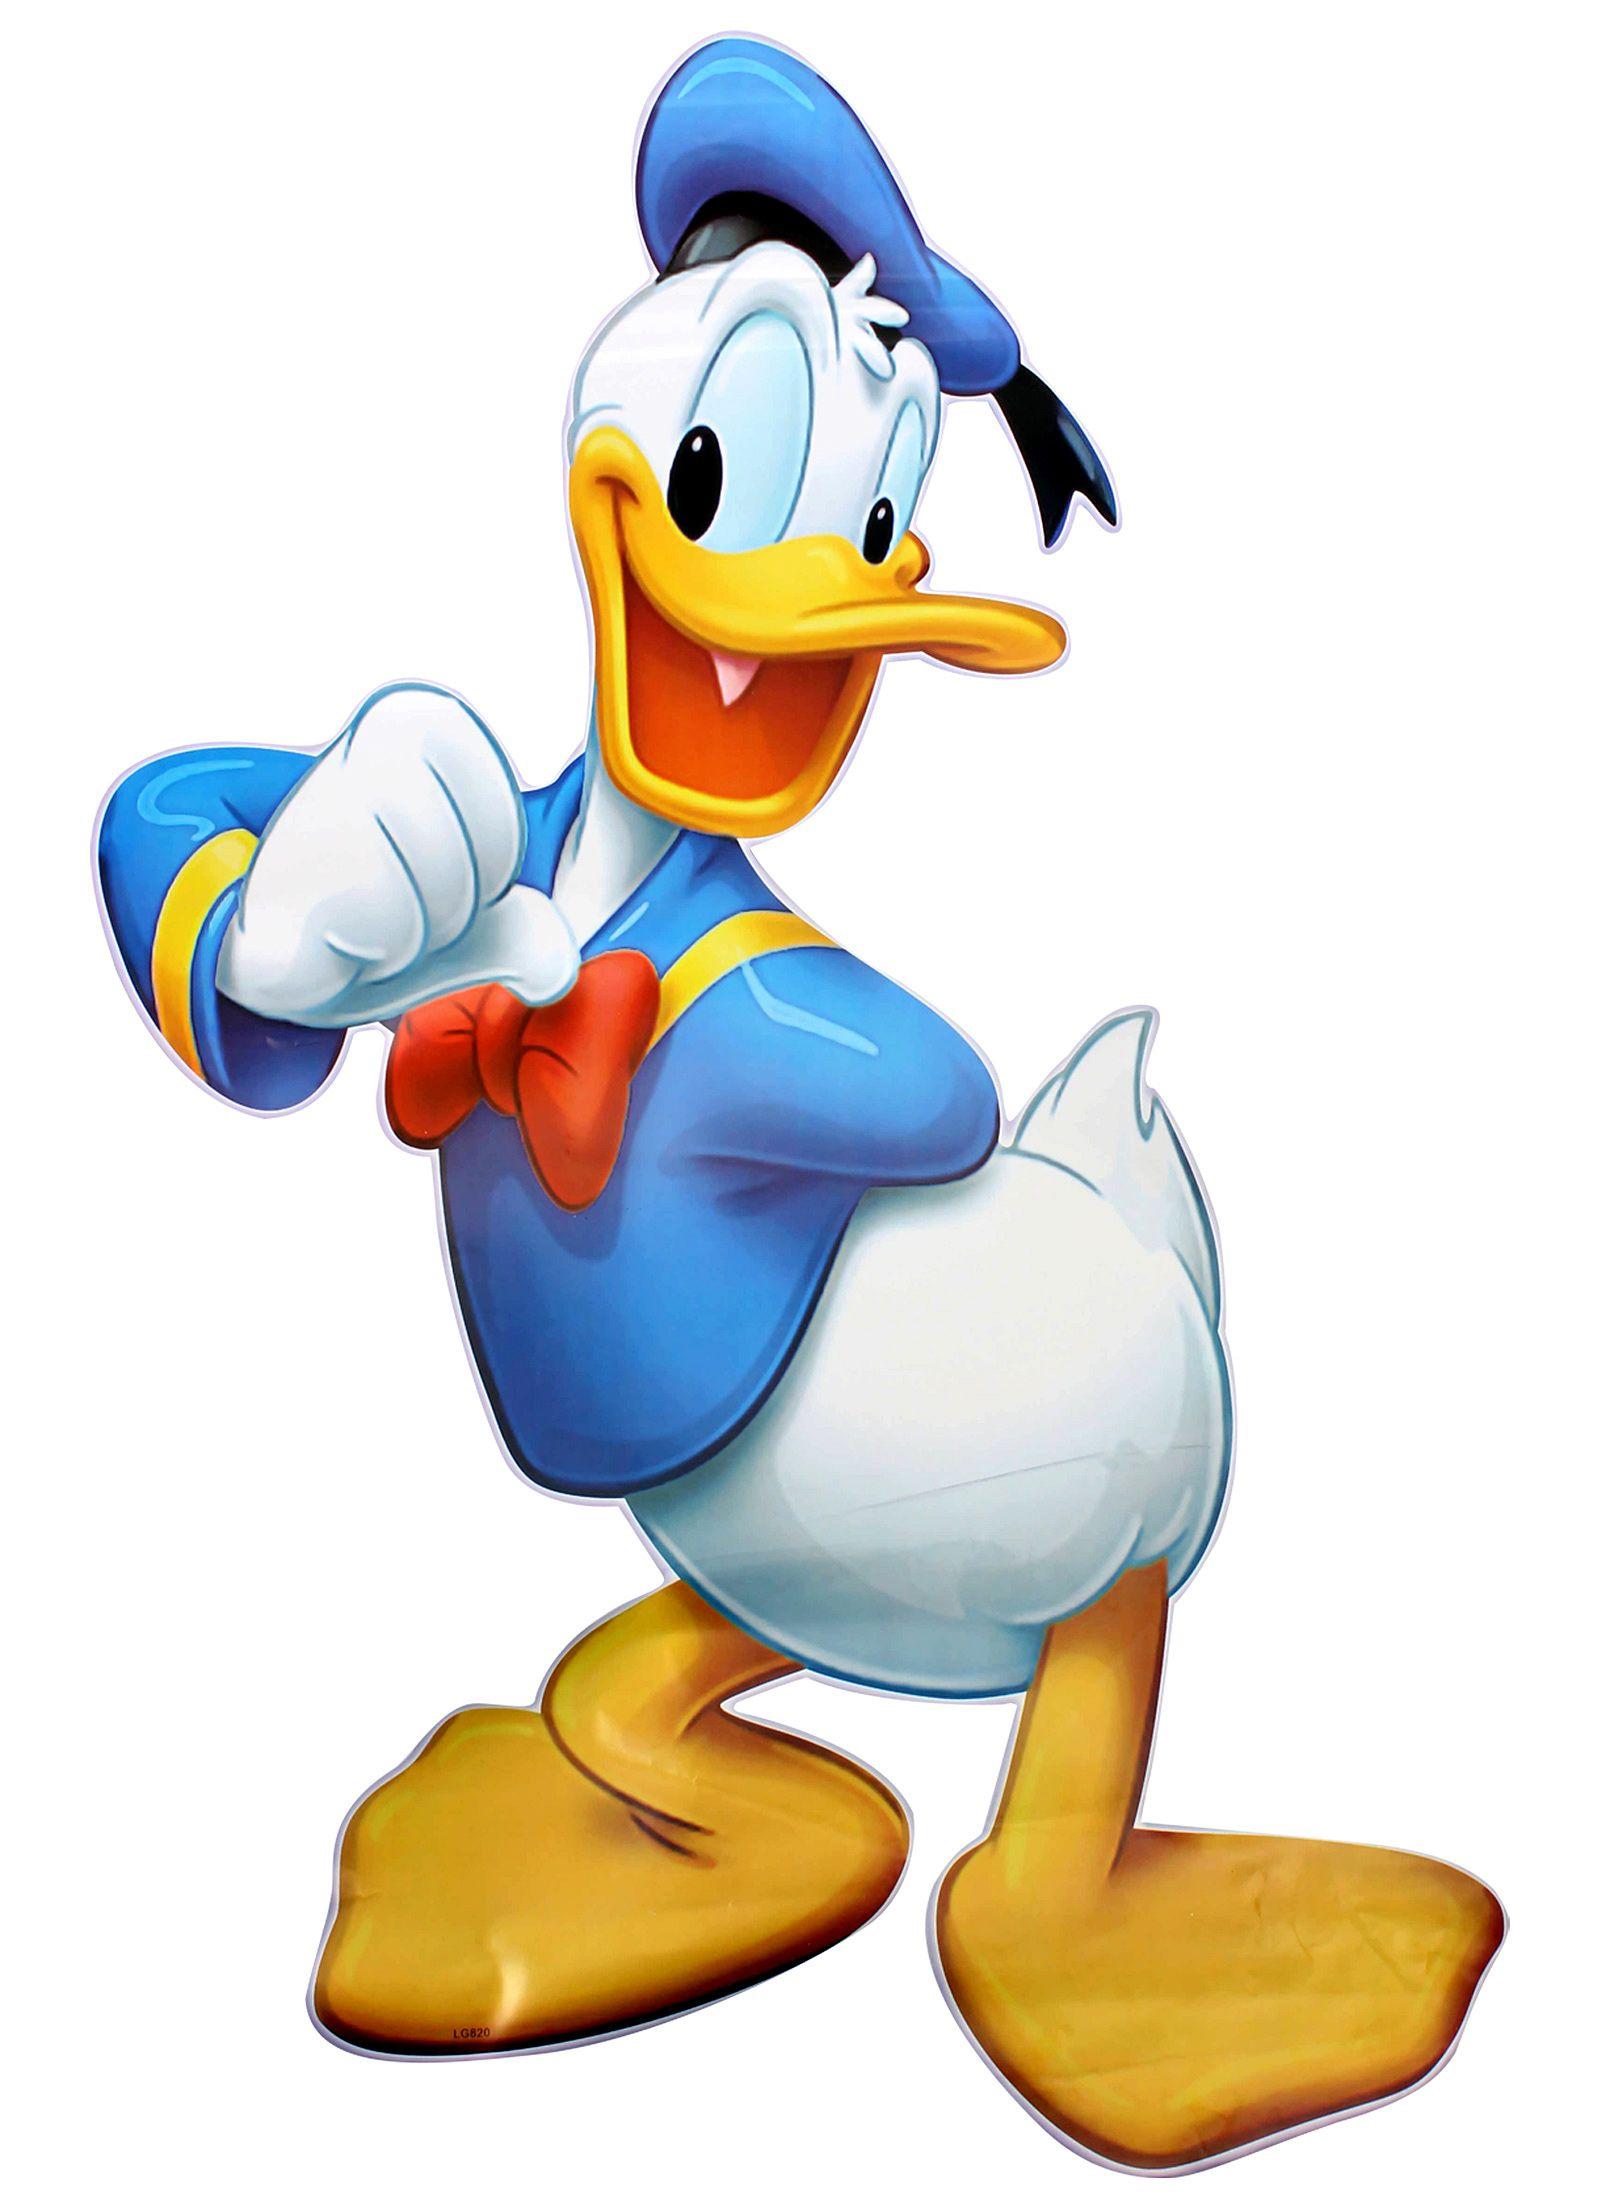 Cool Donald Duck Wallpapers - Top Free Cool Donald Duck Backgrounds ...